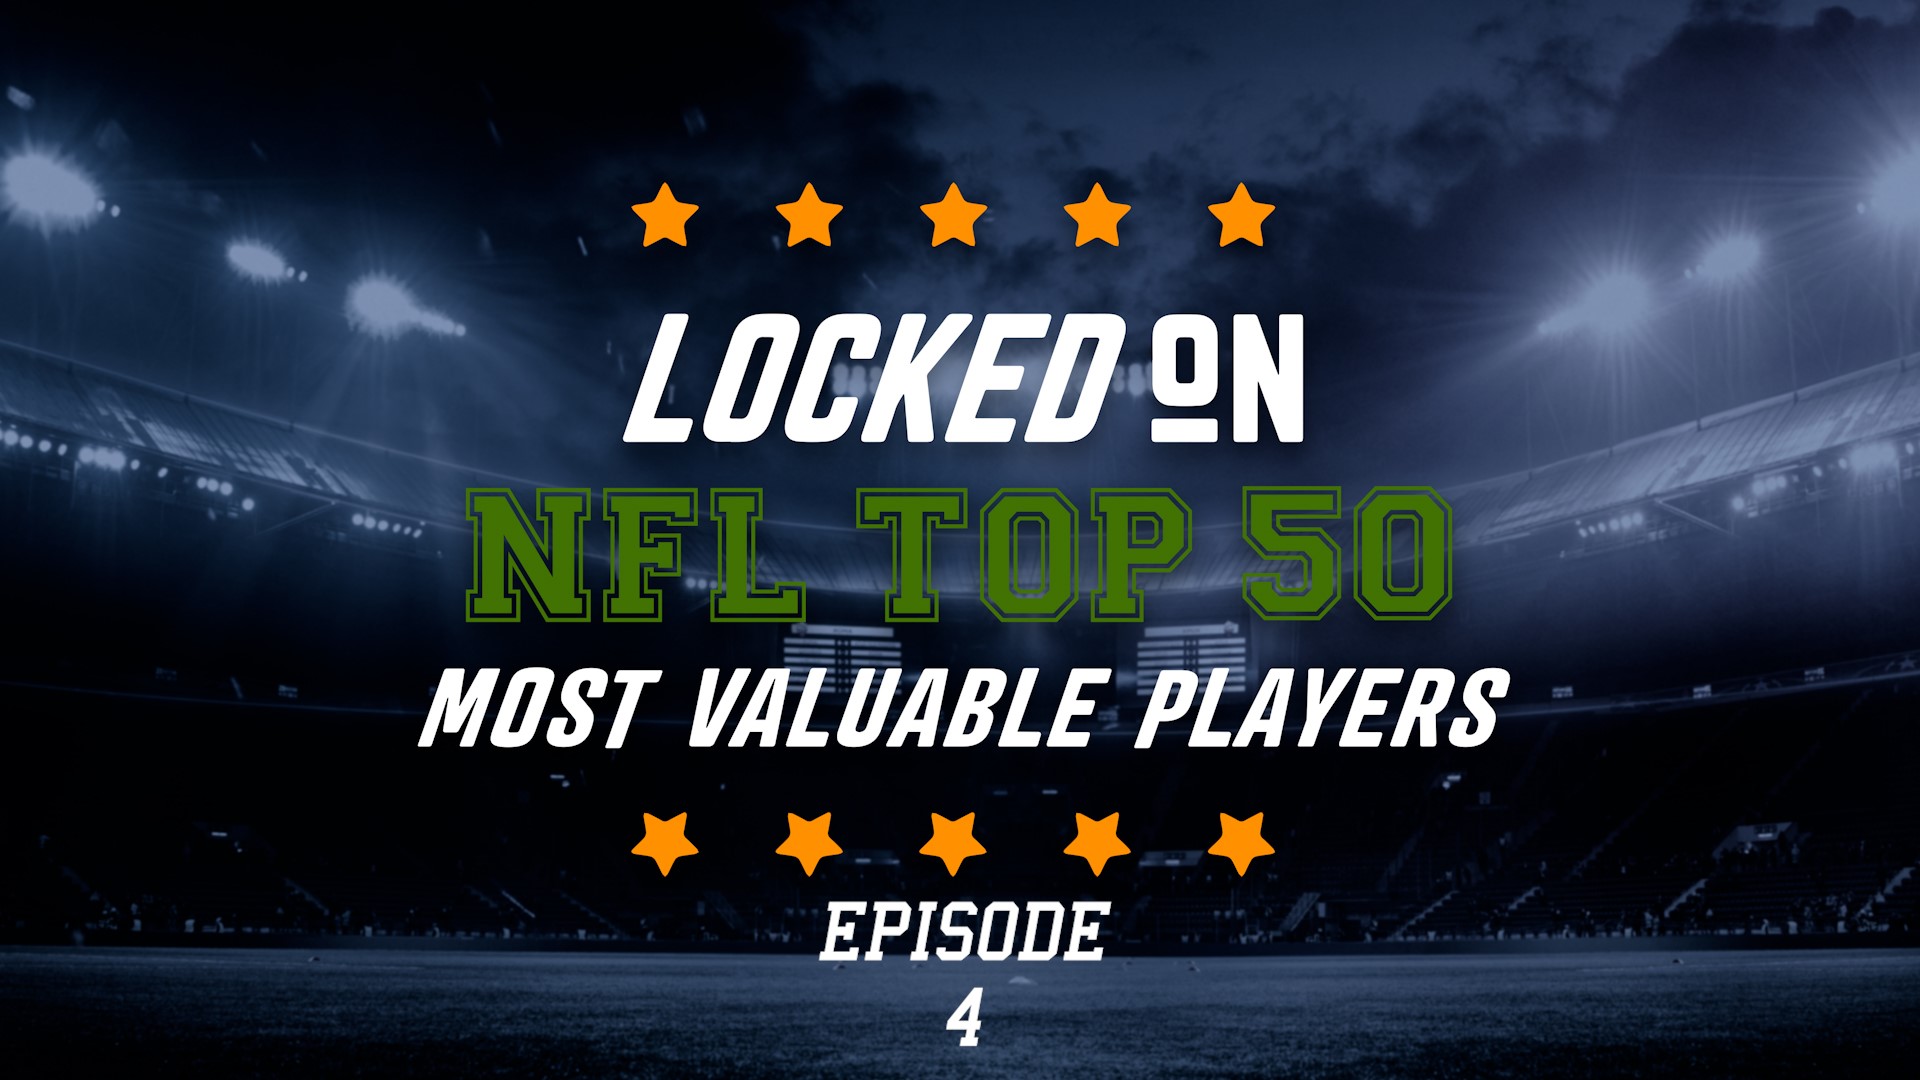 Episode 4 breaks down the most valuable players to their teams, according to BetOnline